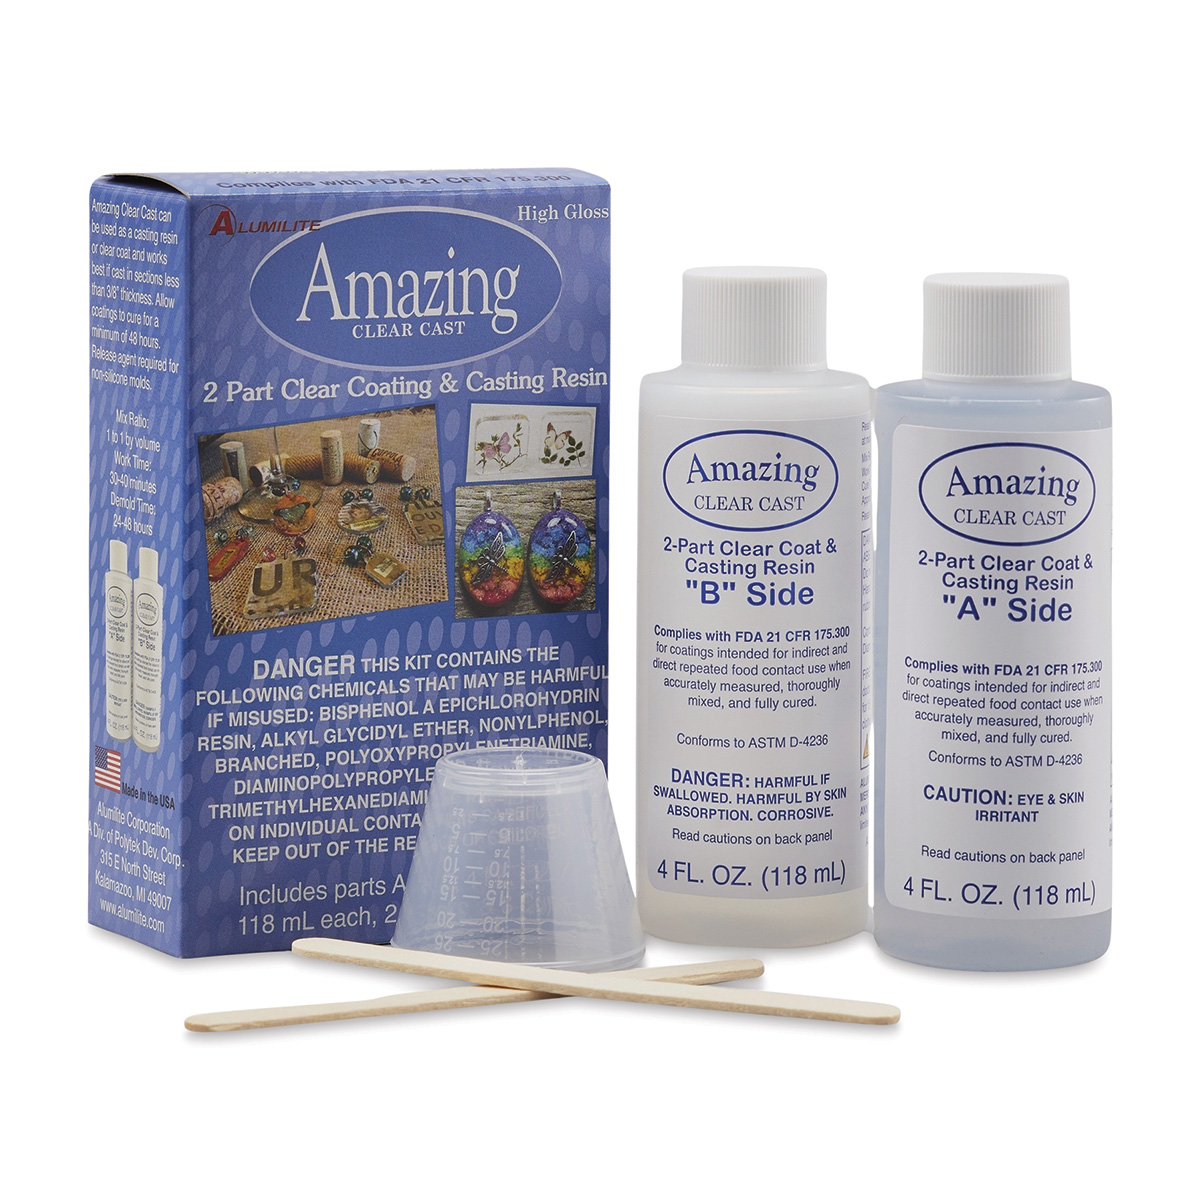 Alumilite White Amazing Casting Resin [1 Gal A + 1 Gal B (2 Gallons) Two-Part Liquid Urethane Kit] Best for Making Arts and Crafts, Jewelry, Decorativ